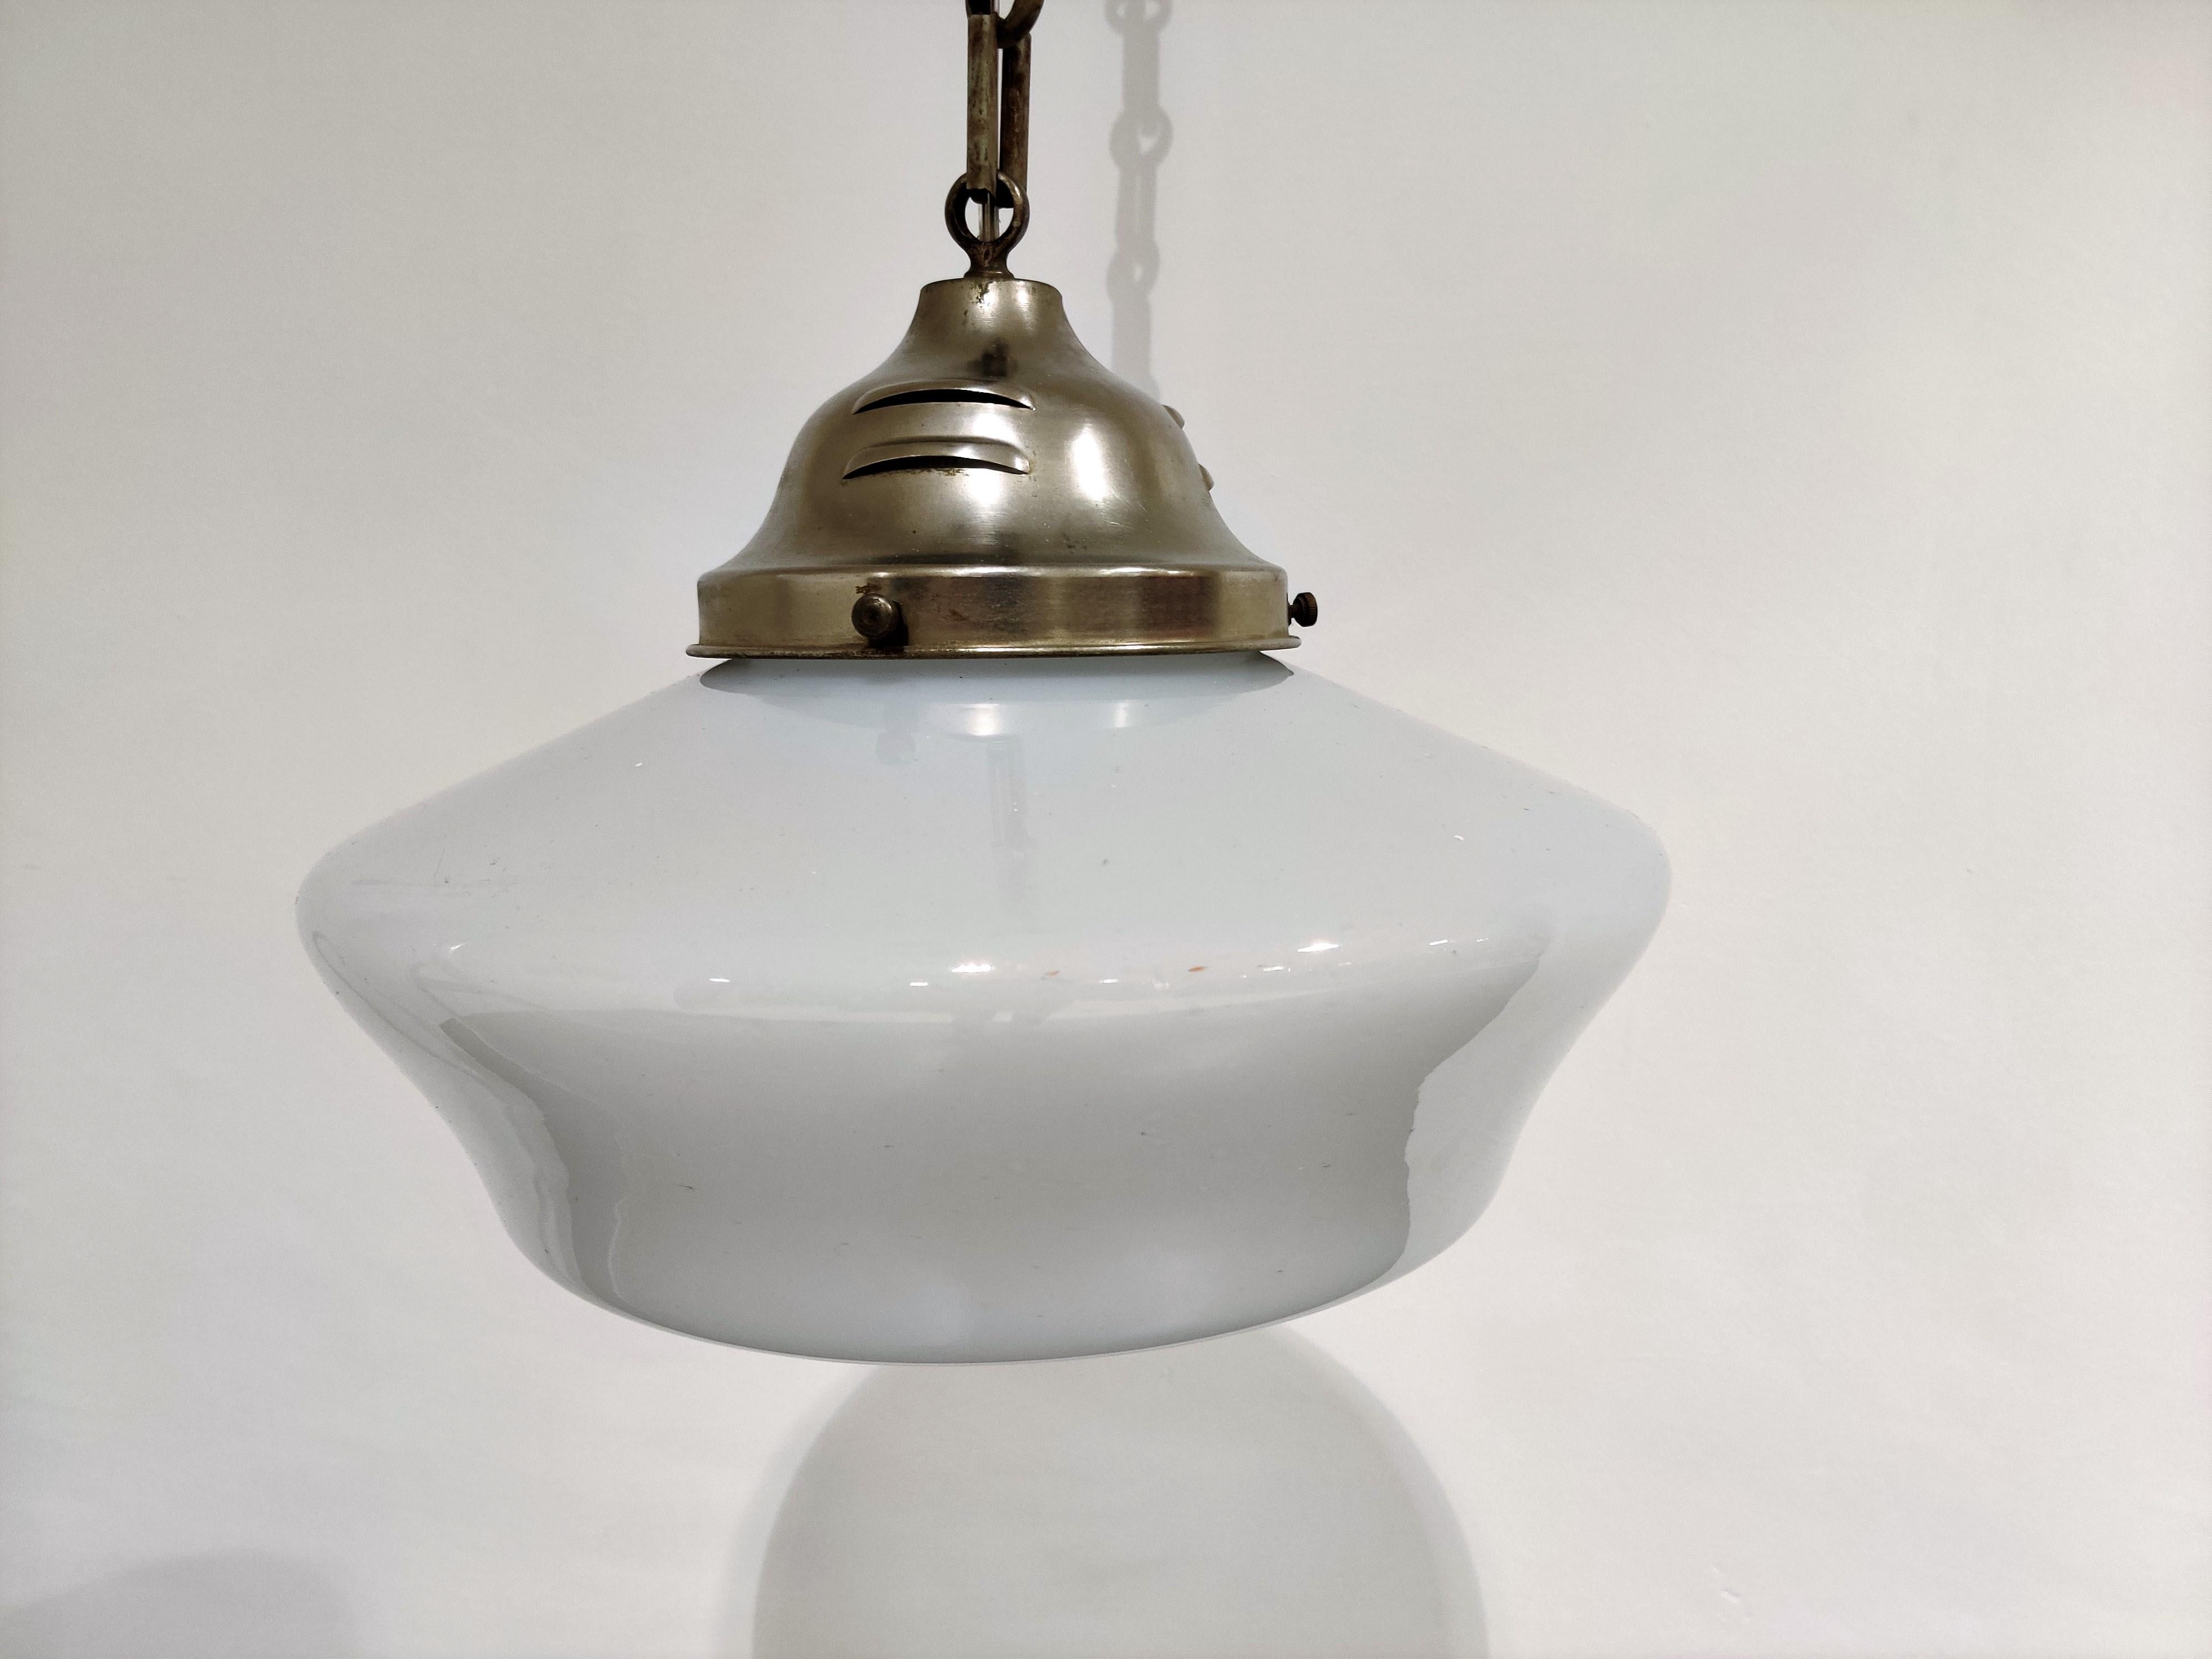 Antique conical shaped Art Deco hallway pendant light.

These lamps are very typical for the Art Deco era and were widely used to be hung in hallways, offices or larger public places.

The lamp havethe original copper share holder and ceiling